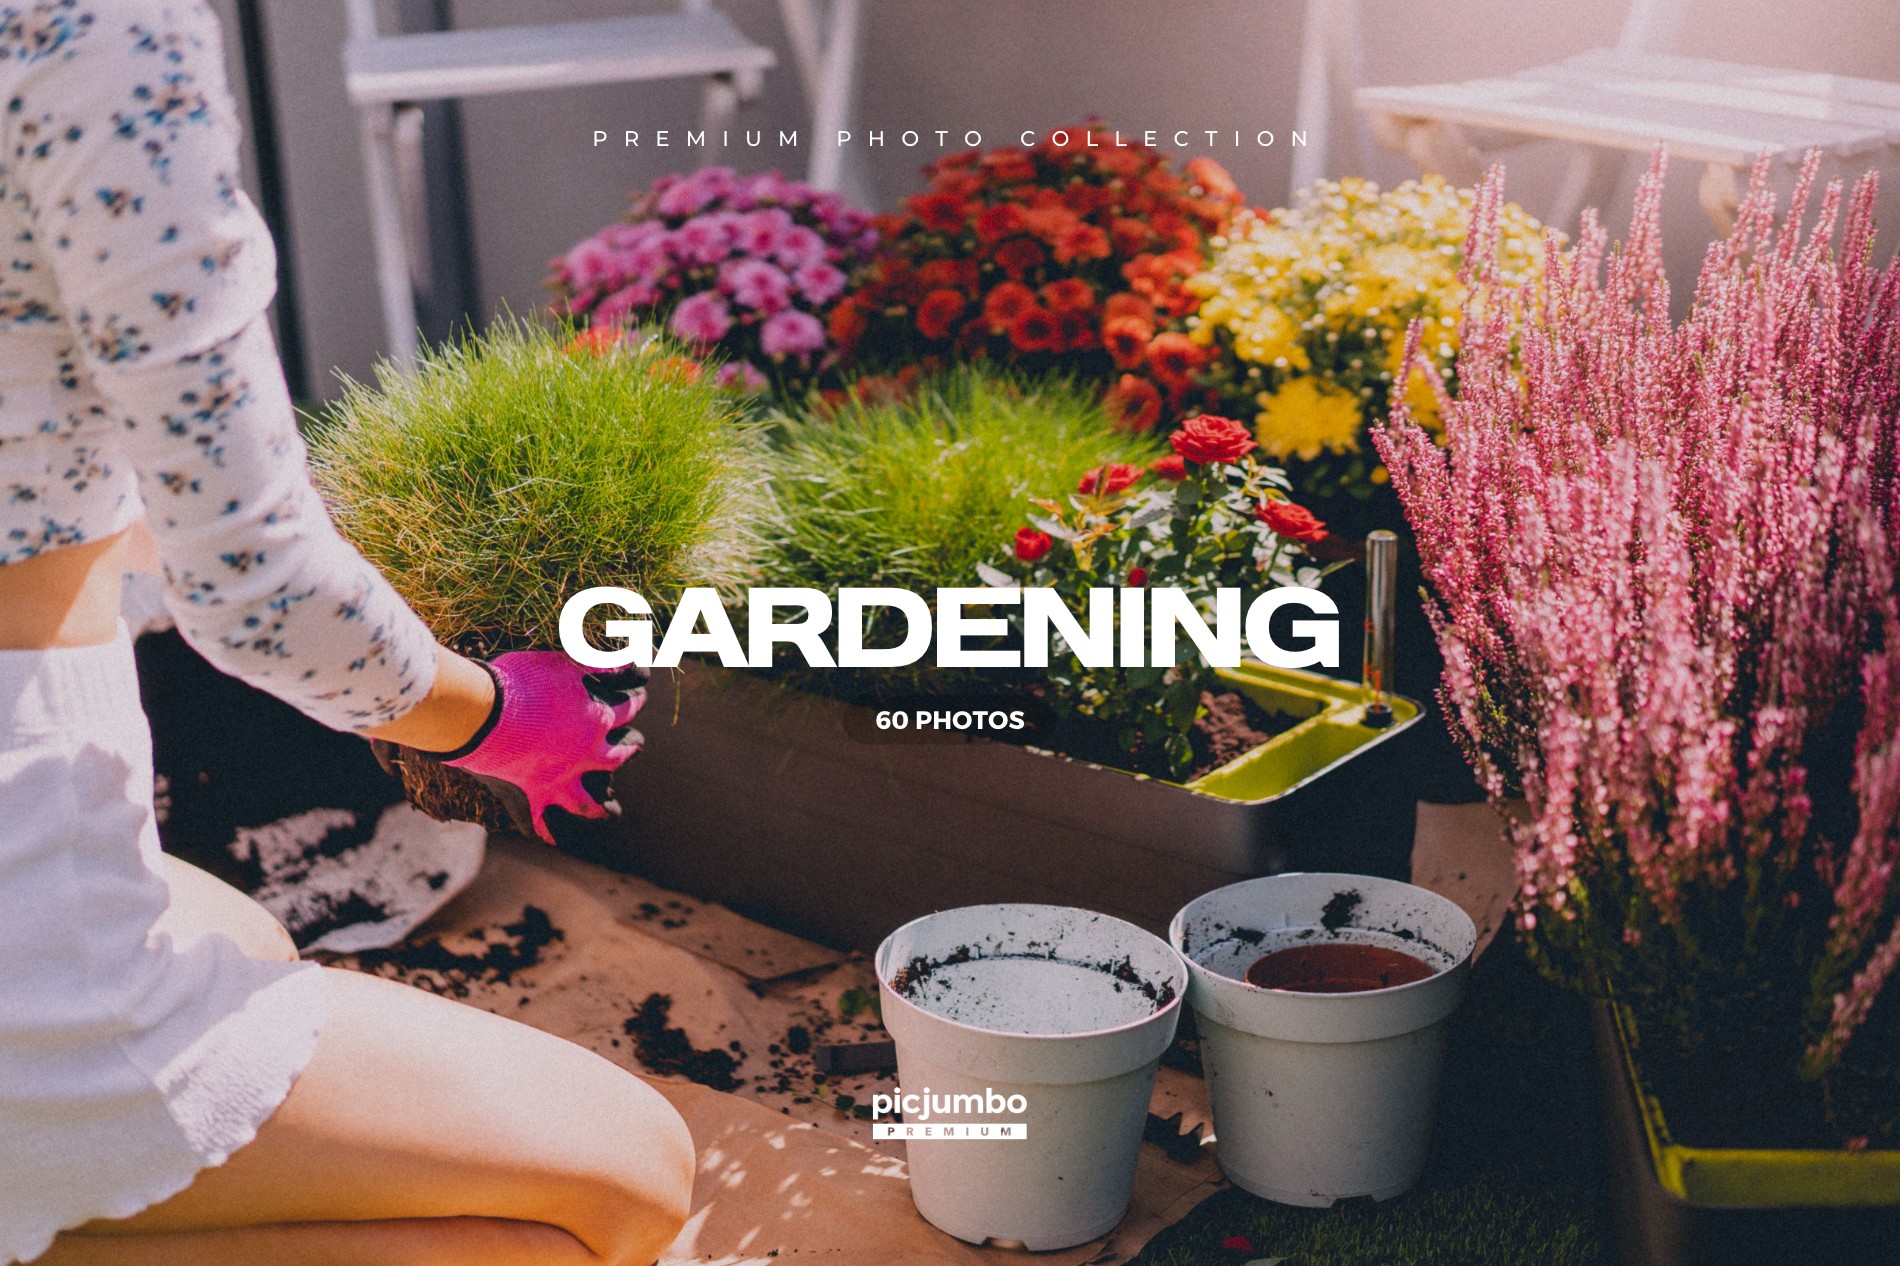 Download hi-res stock photos from our Gardening PREMIUM Collection!